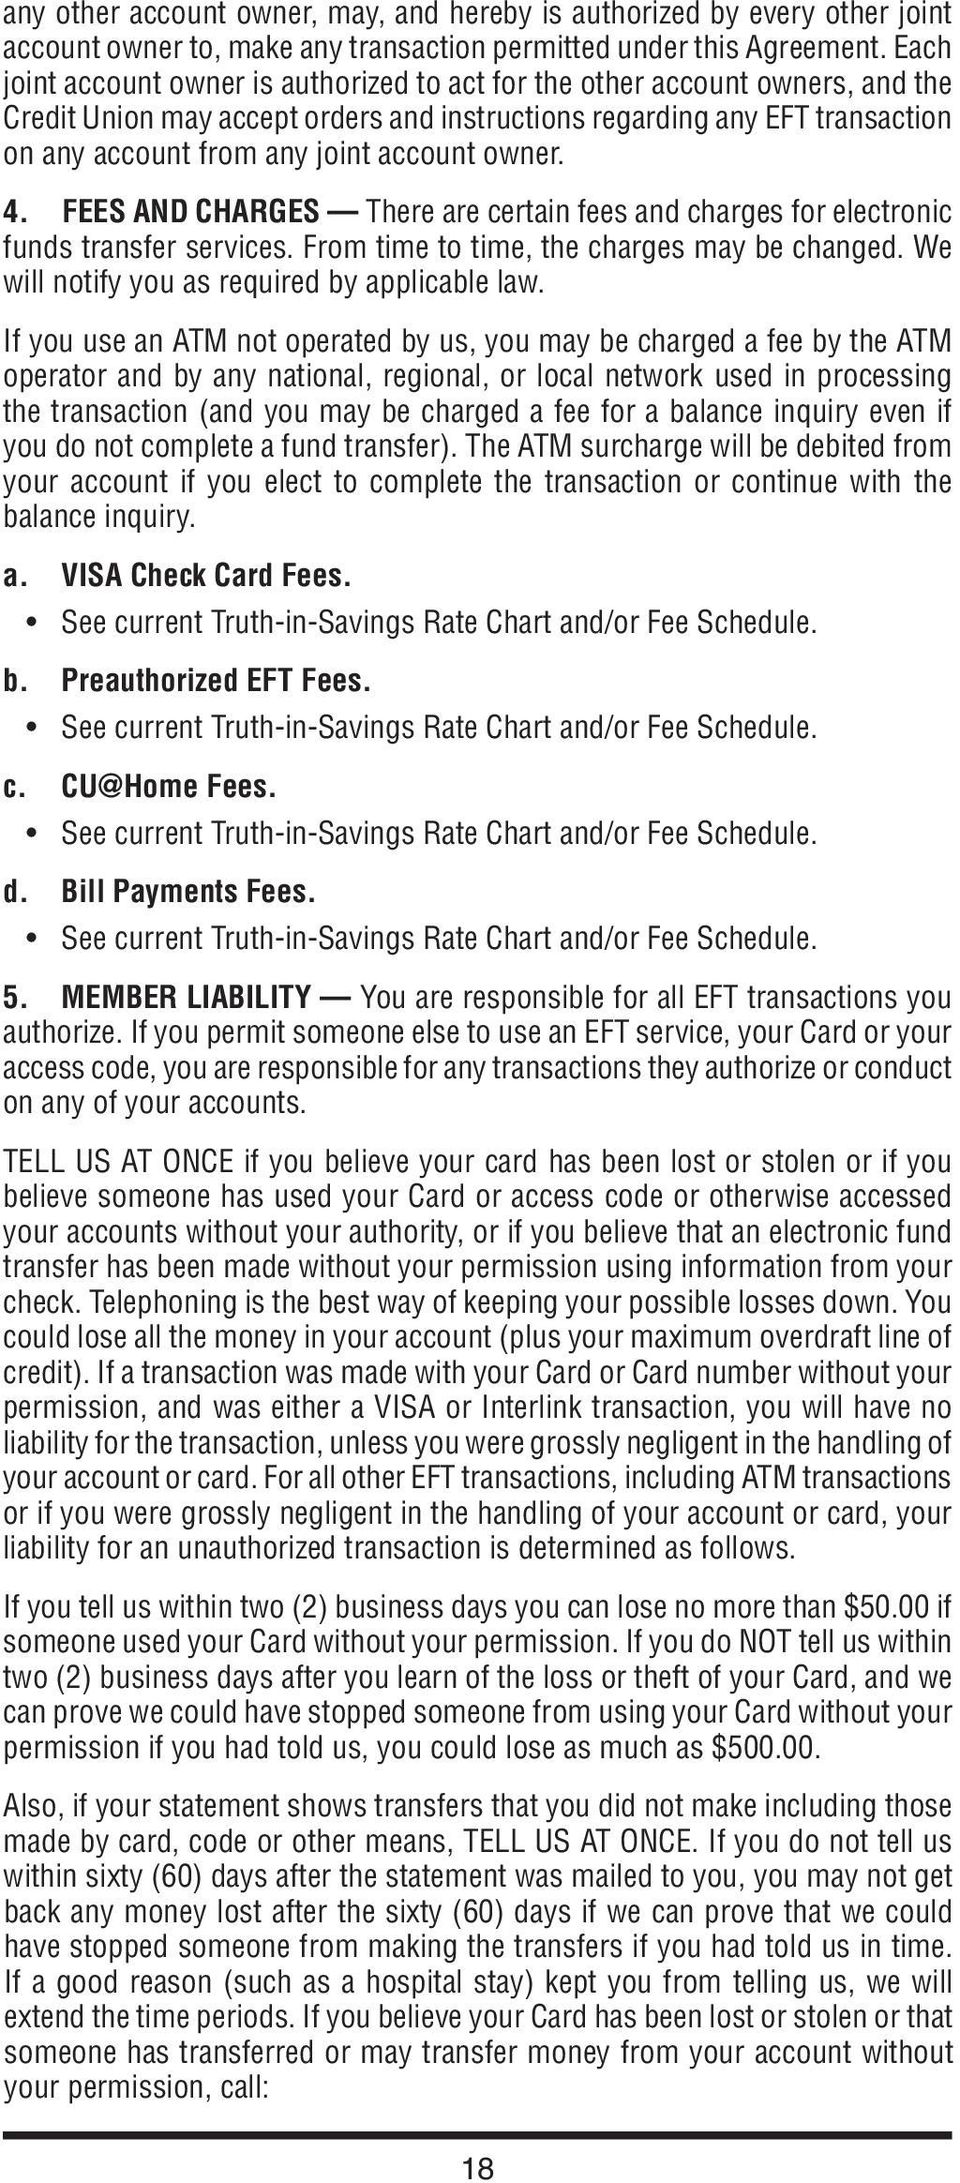 owner. 4. Fees and Charges There are certain fees and charges for electronic funds transfer services. From time to time, the charges may be changed. We will notify you as required by applicable law.